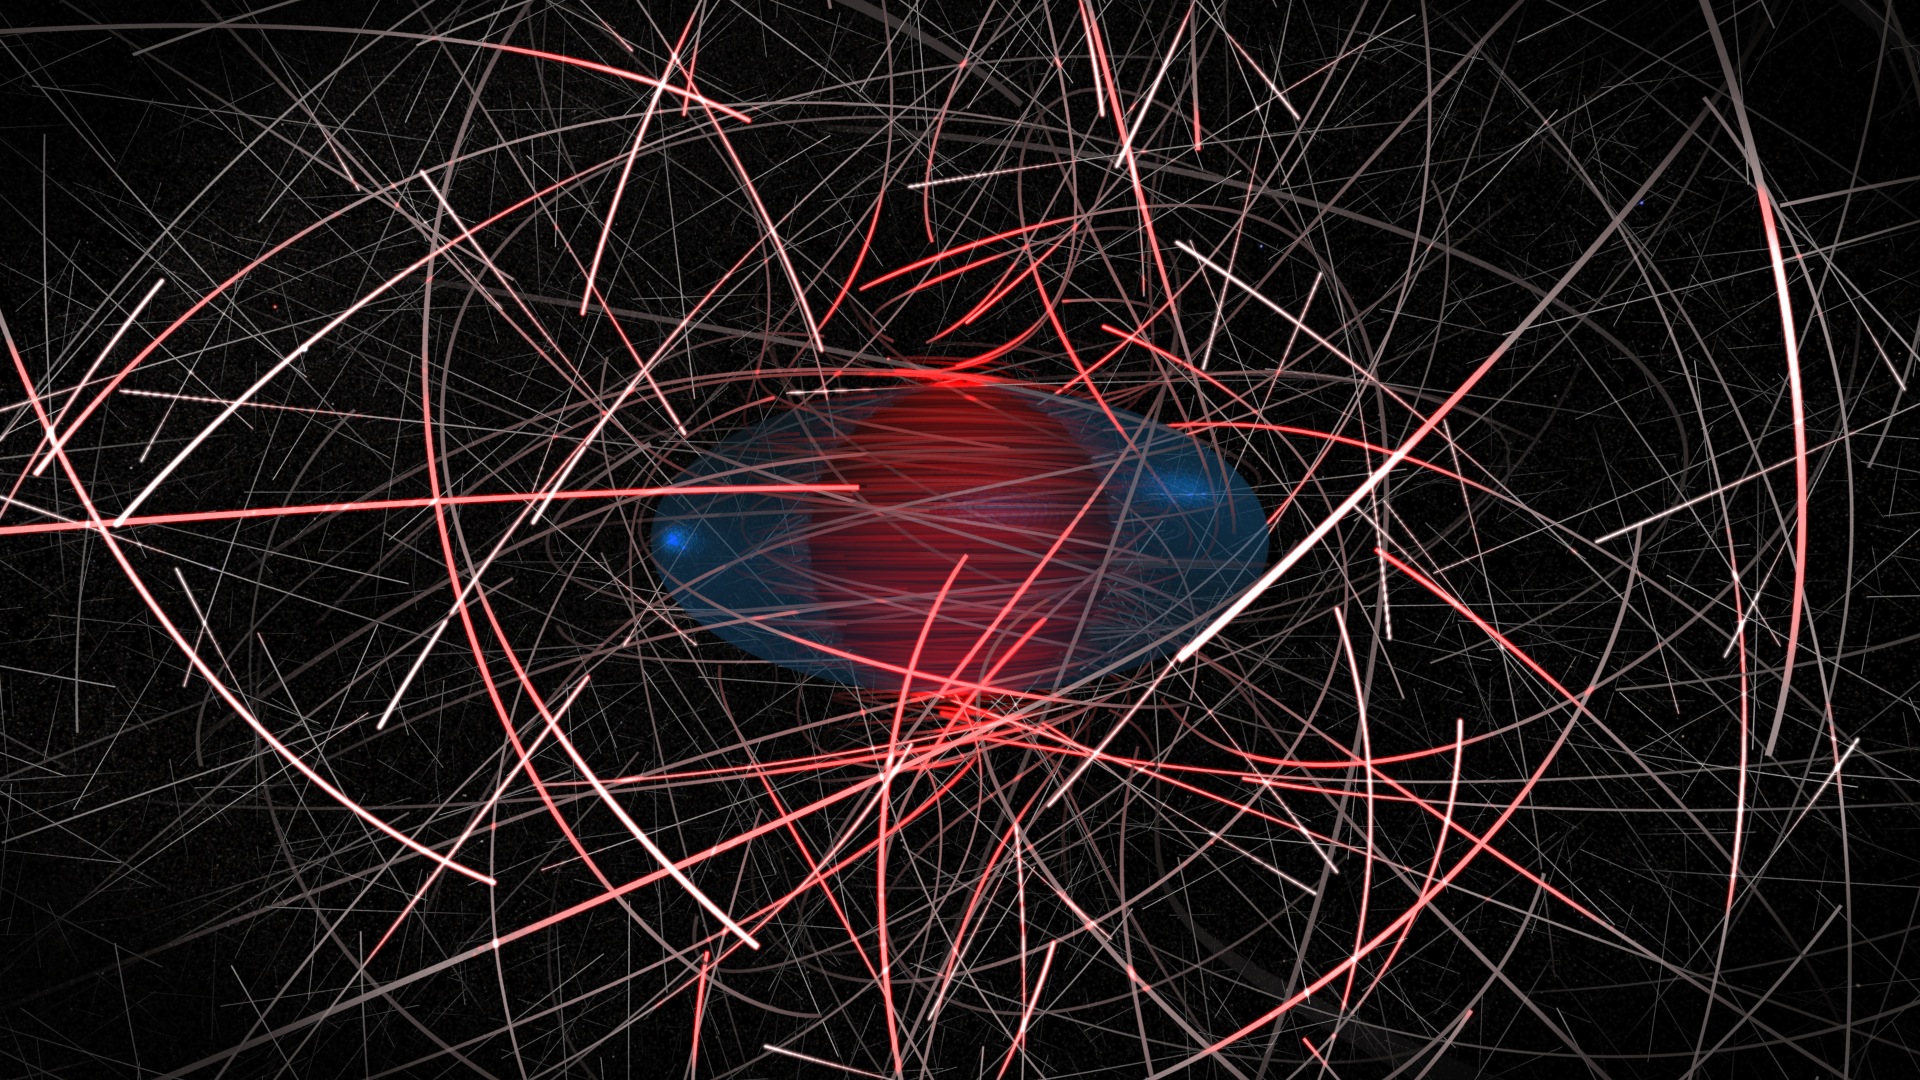  The image layers multiple frames from the visualization to increase the number of dark matter particles. The particles are shown as gray spheres attached to shaded trails representing their motion. Redder trails indicate particles more strongly affected by the black hole's gravitation and closer to its event horizon (black sphere at center, mostly hidden by trails). The ergosphere, where all matter and light must follow the black hole's spin, is shown in teal. Credit: NASA Goddard Scientific Visualization Studio 